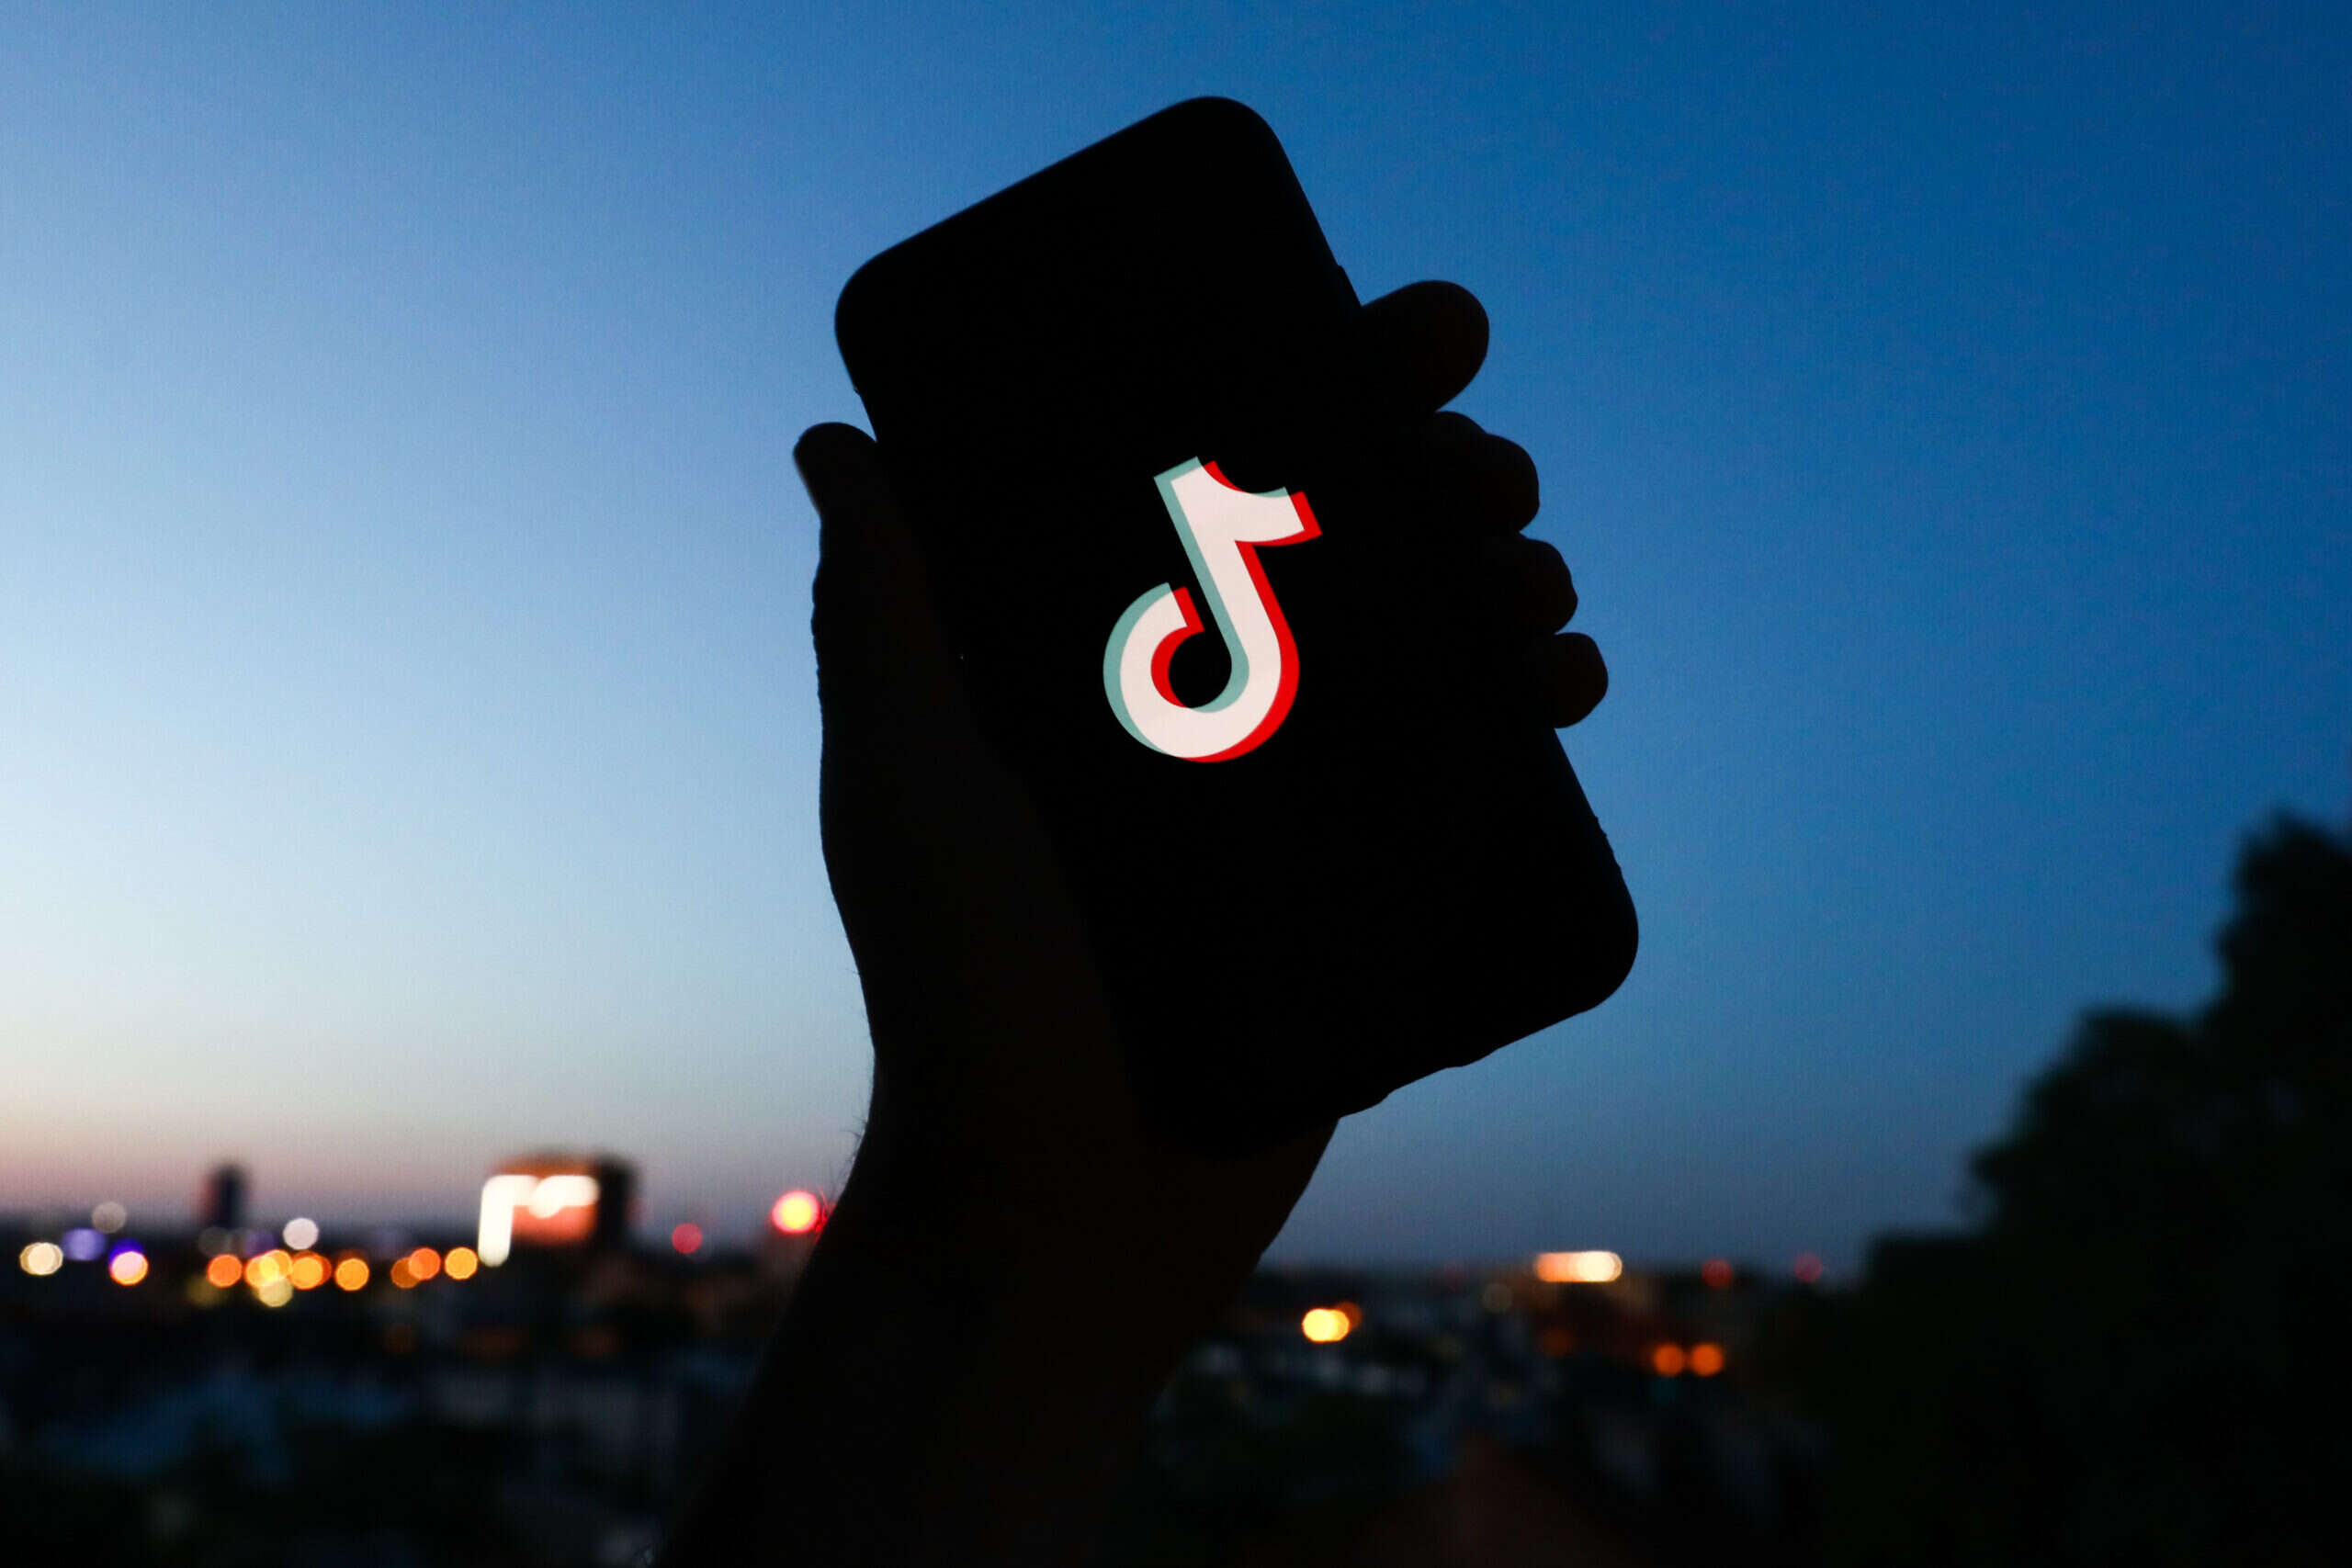 TikTok is fastest growing news source for UK adults, Ofcom finds